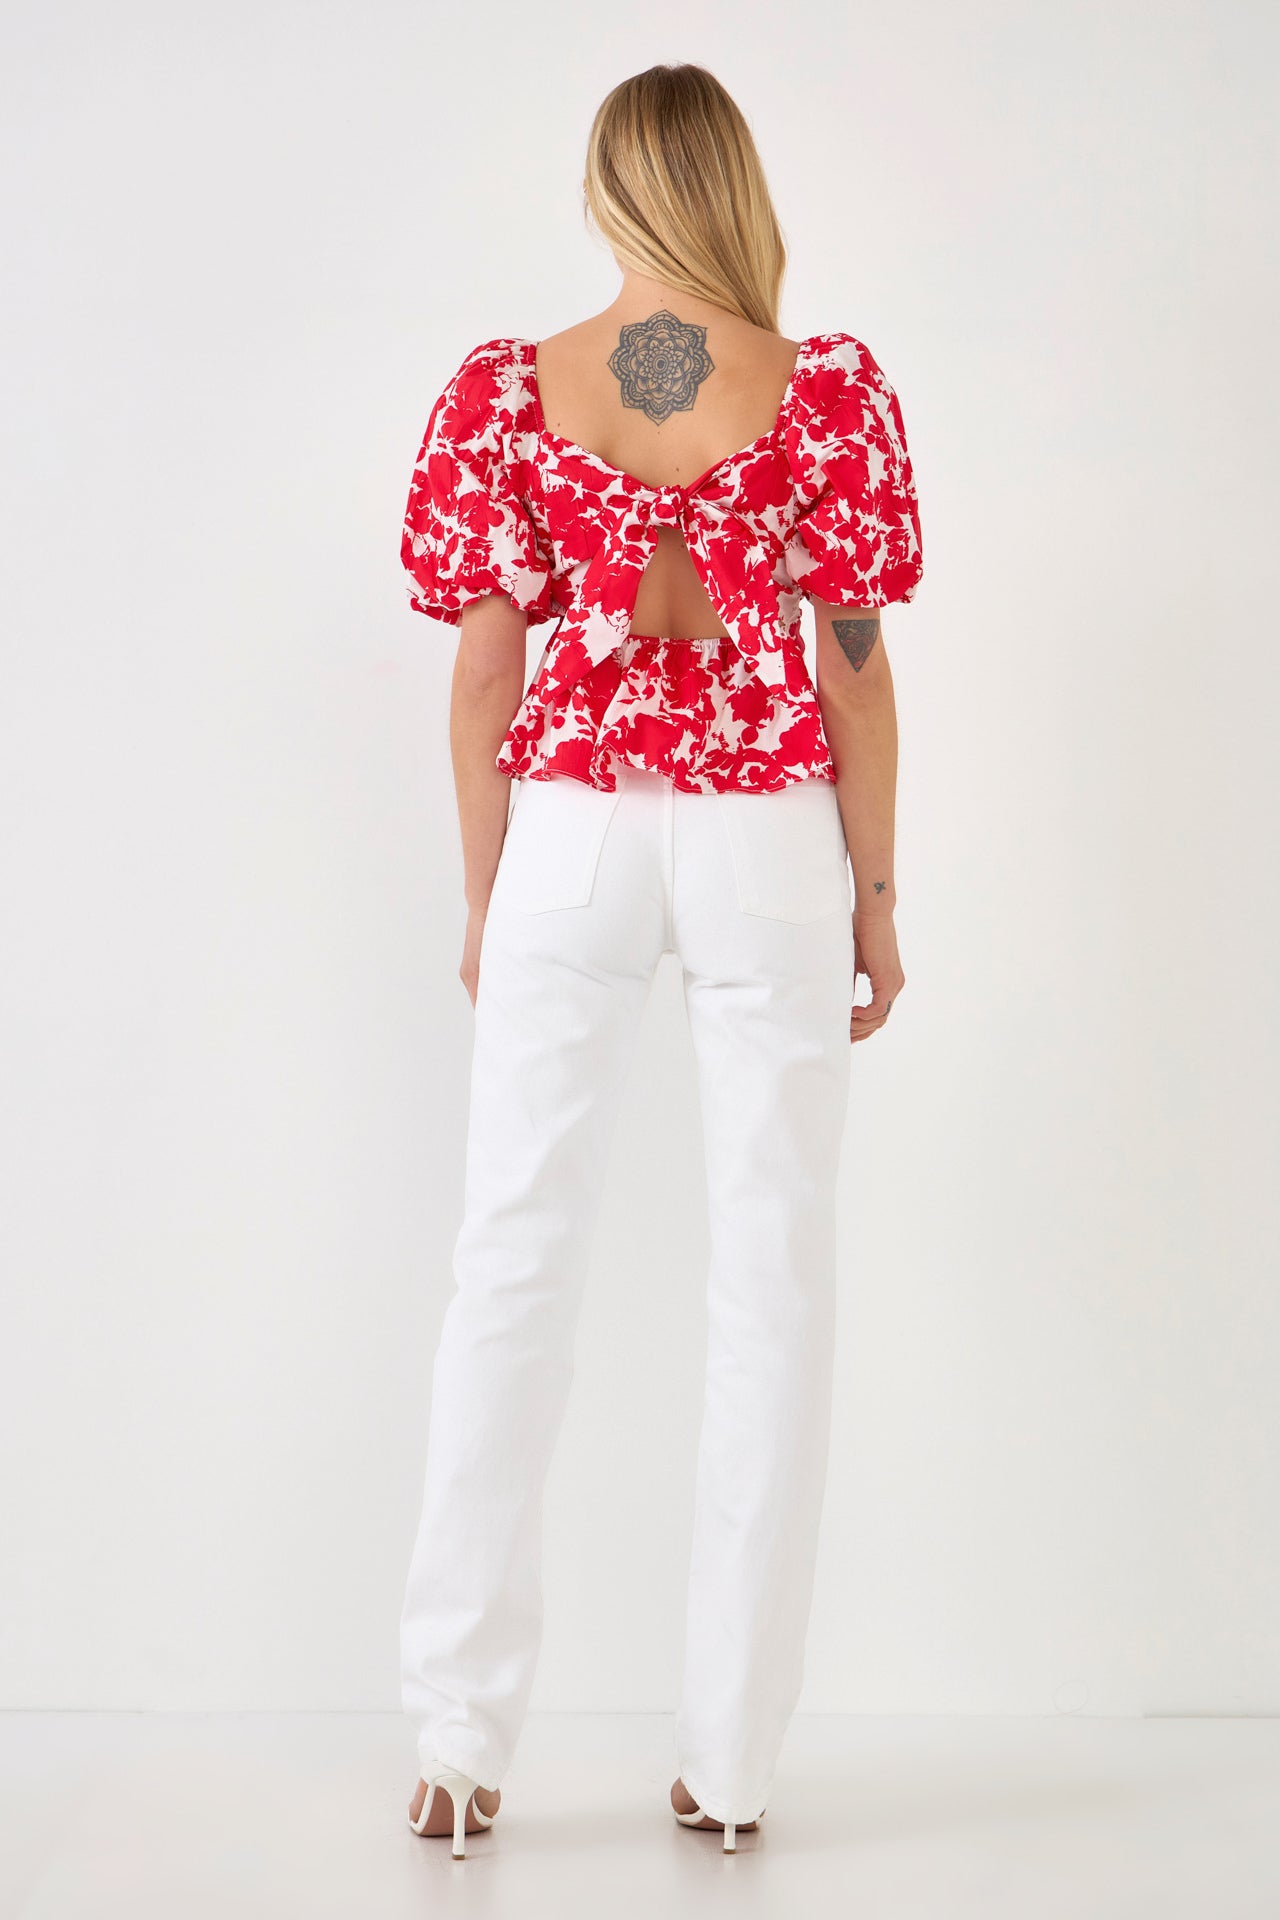 FREE THE ROSES - Floral Tied Back Top - TOPS available at Objectrare